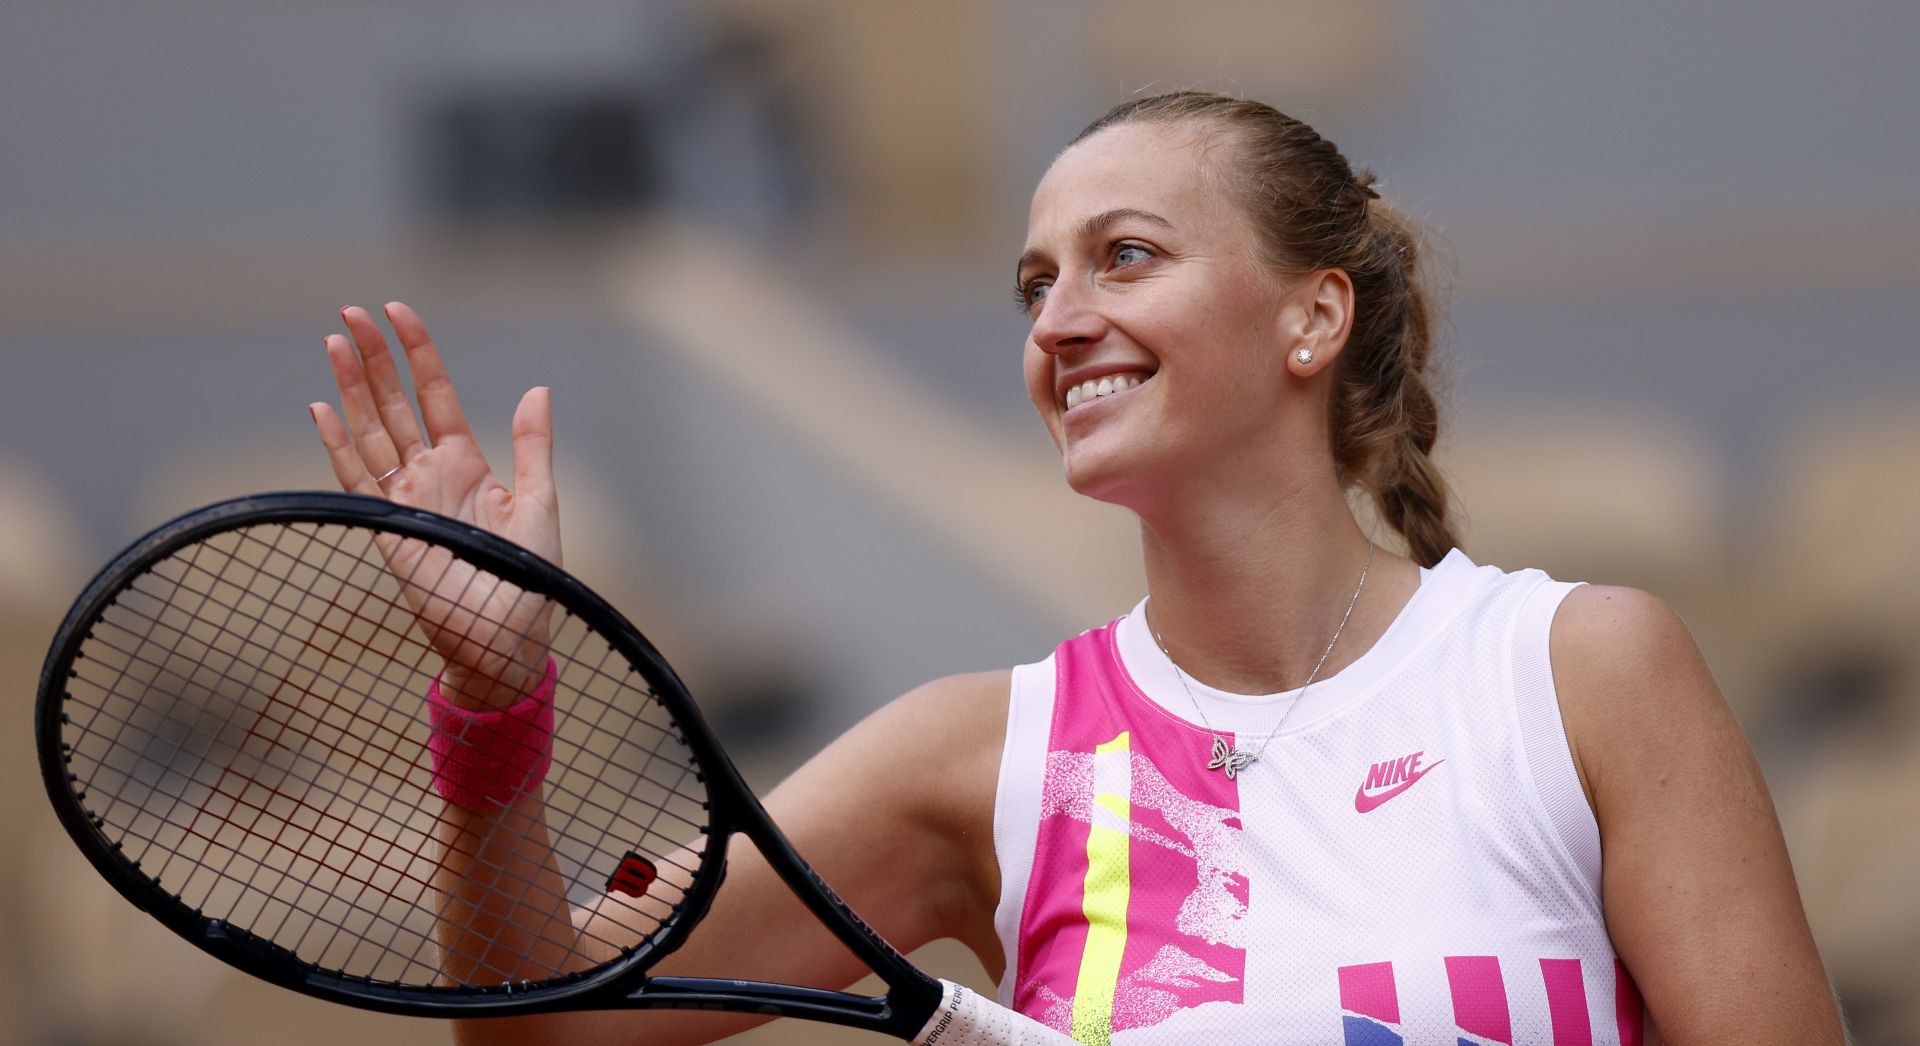 epa08726320 Petra Kvitova of the Czech Republic reacts after winning against Laura Siegemund of Germany in their women’s quarter final match during the French Open tennis tournament at Roland ​Garros in Paris, France, 07 October 2020.  EPA/YOAN VALAT